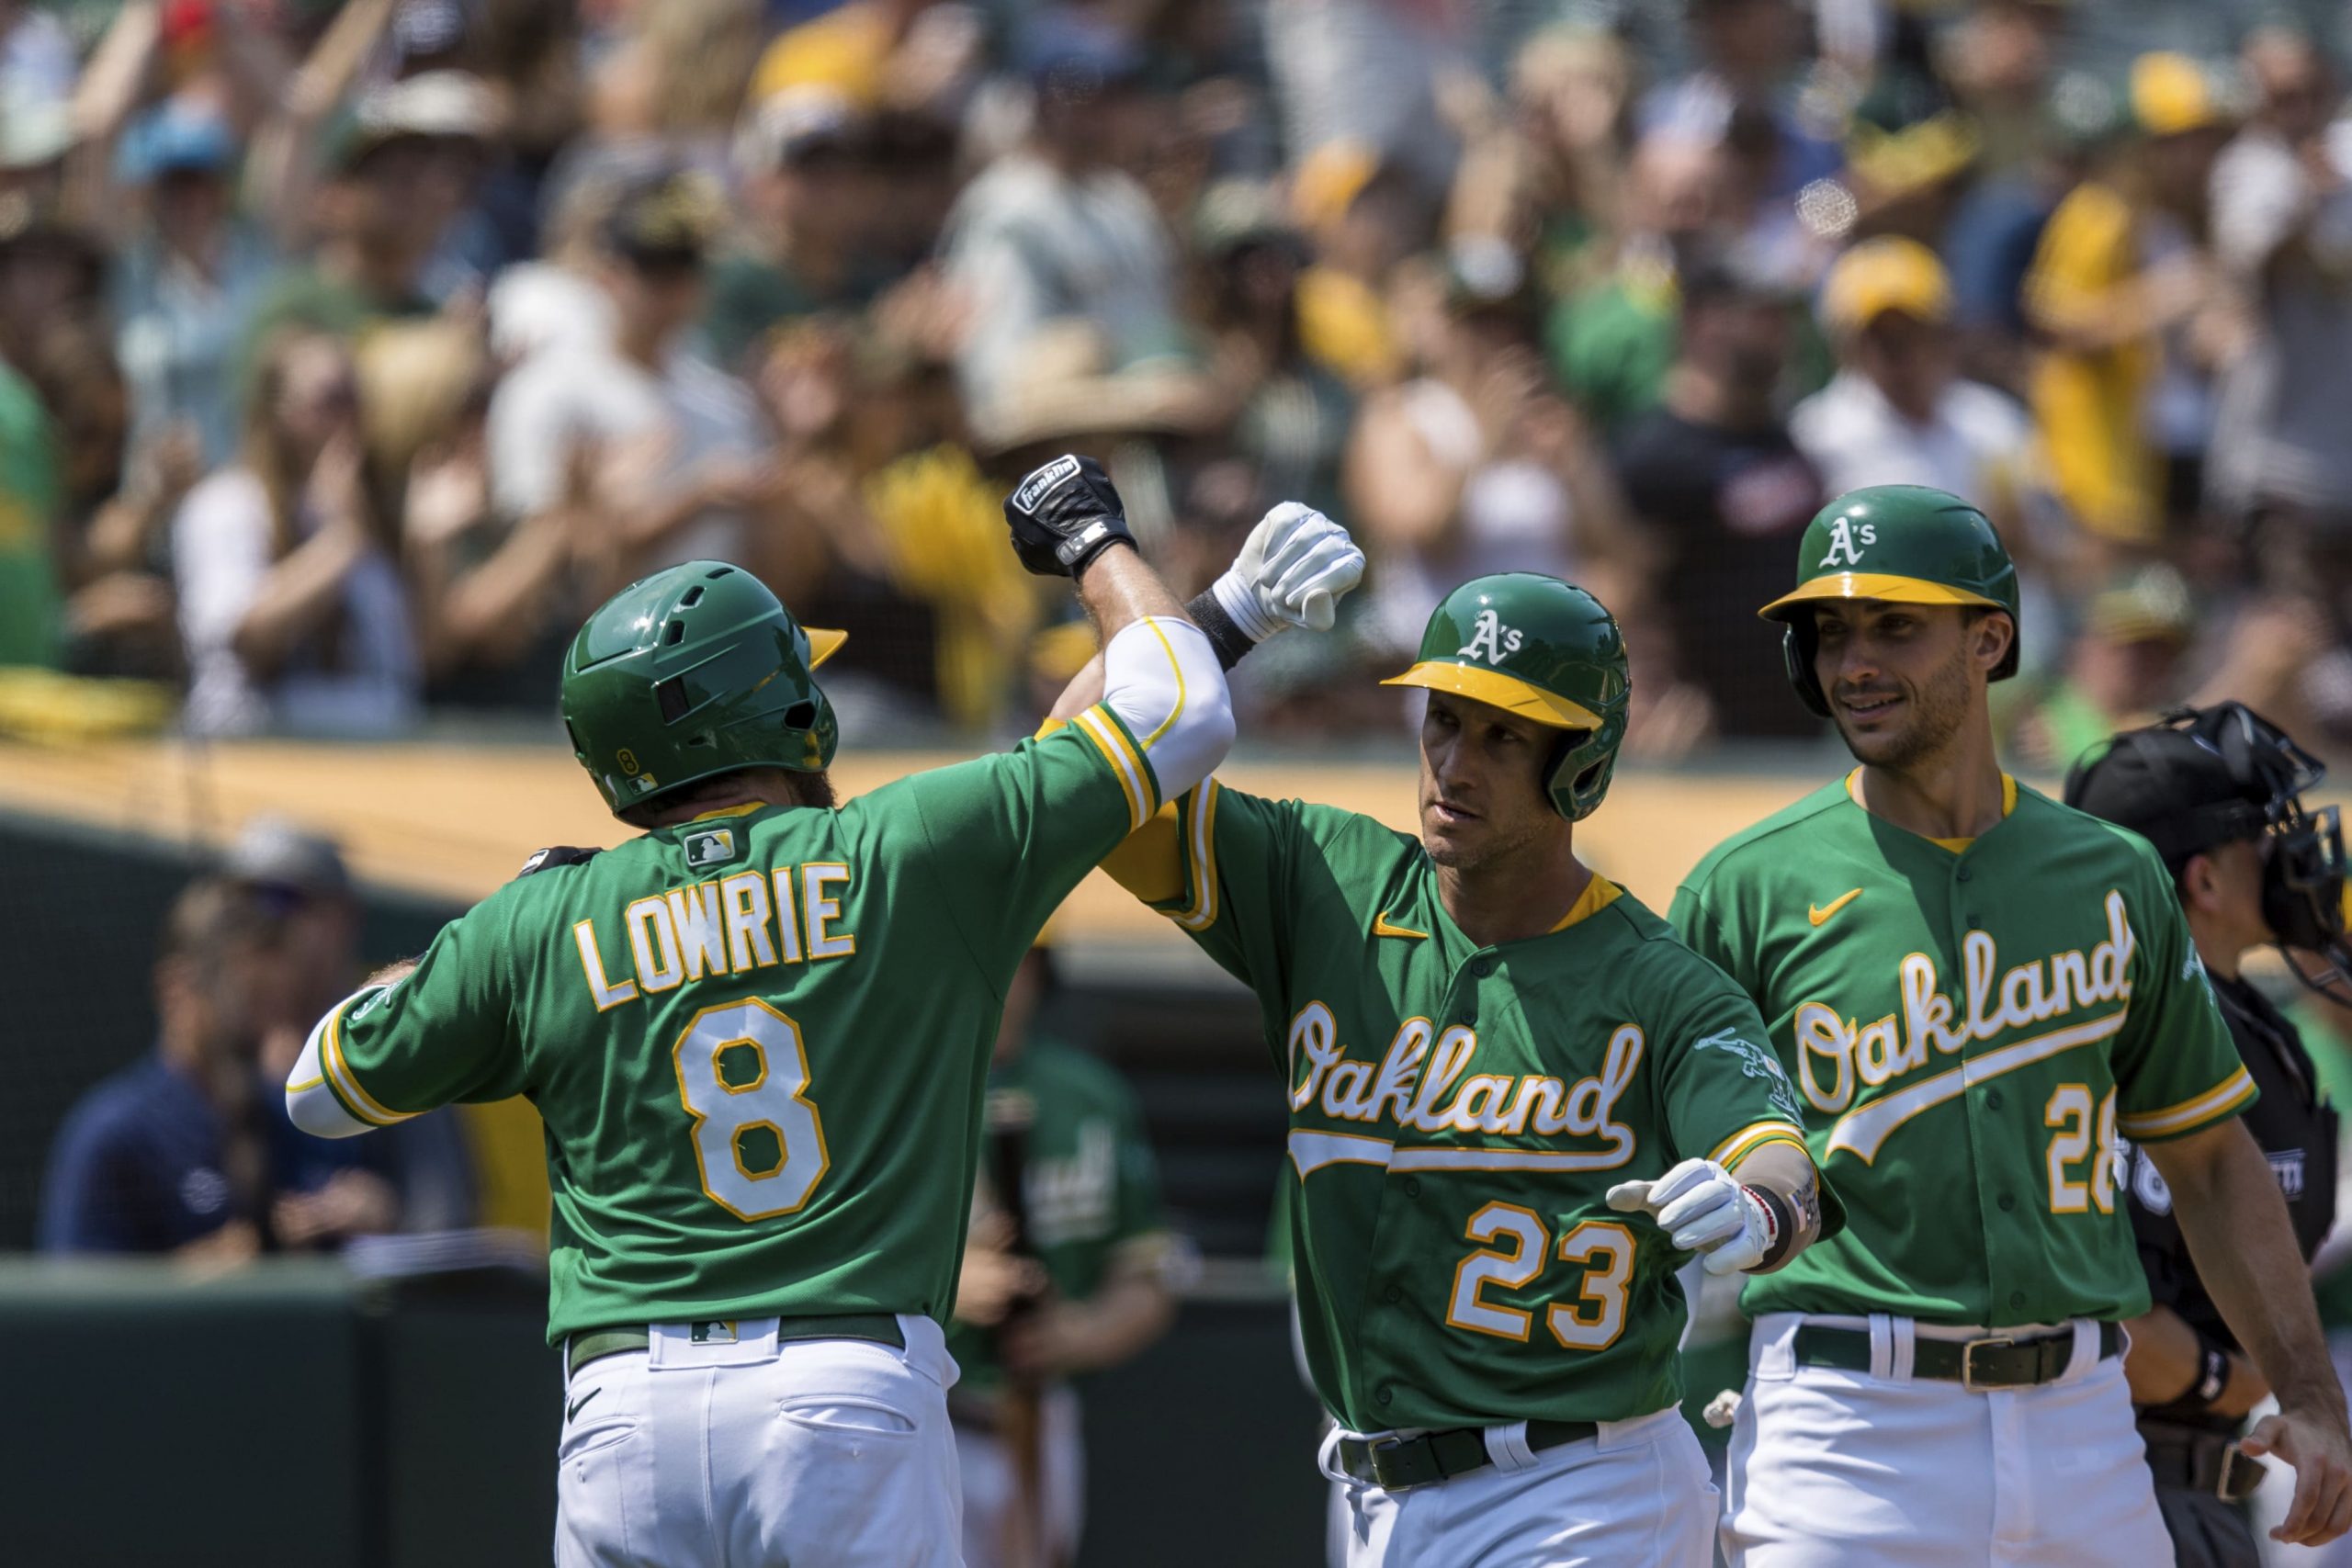 Oakland Athletics' Yan Gomes (23) celebrates with Jed Lowrie (8) and Matt Olson (28) after hitting a three-run home run against the Texas Rangers during the fourth inning of a baseball game in Oakland, Calif., Saturday, Aug. 7, 2021.